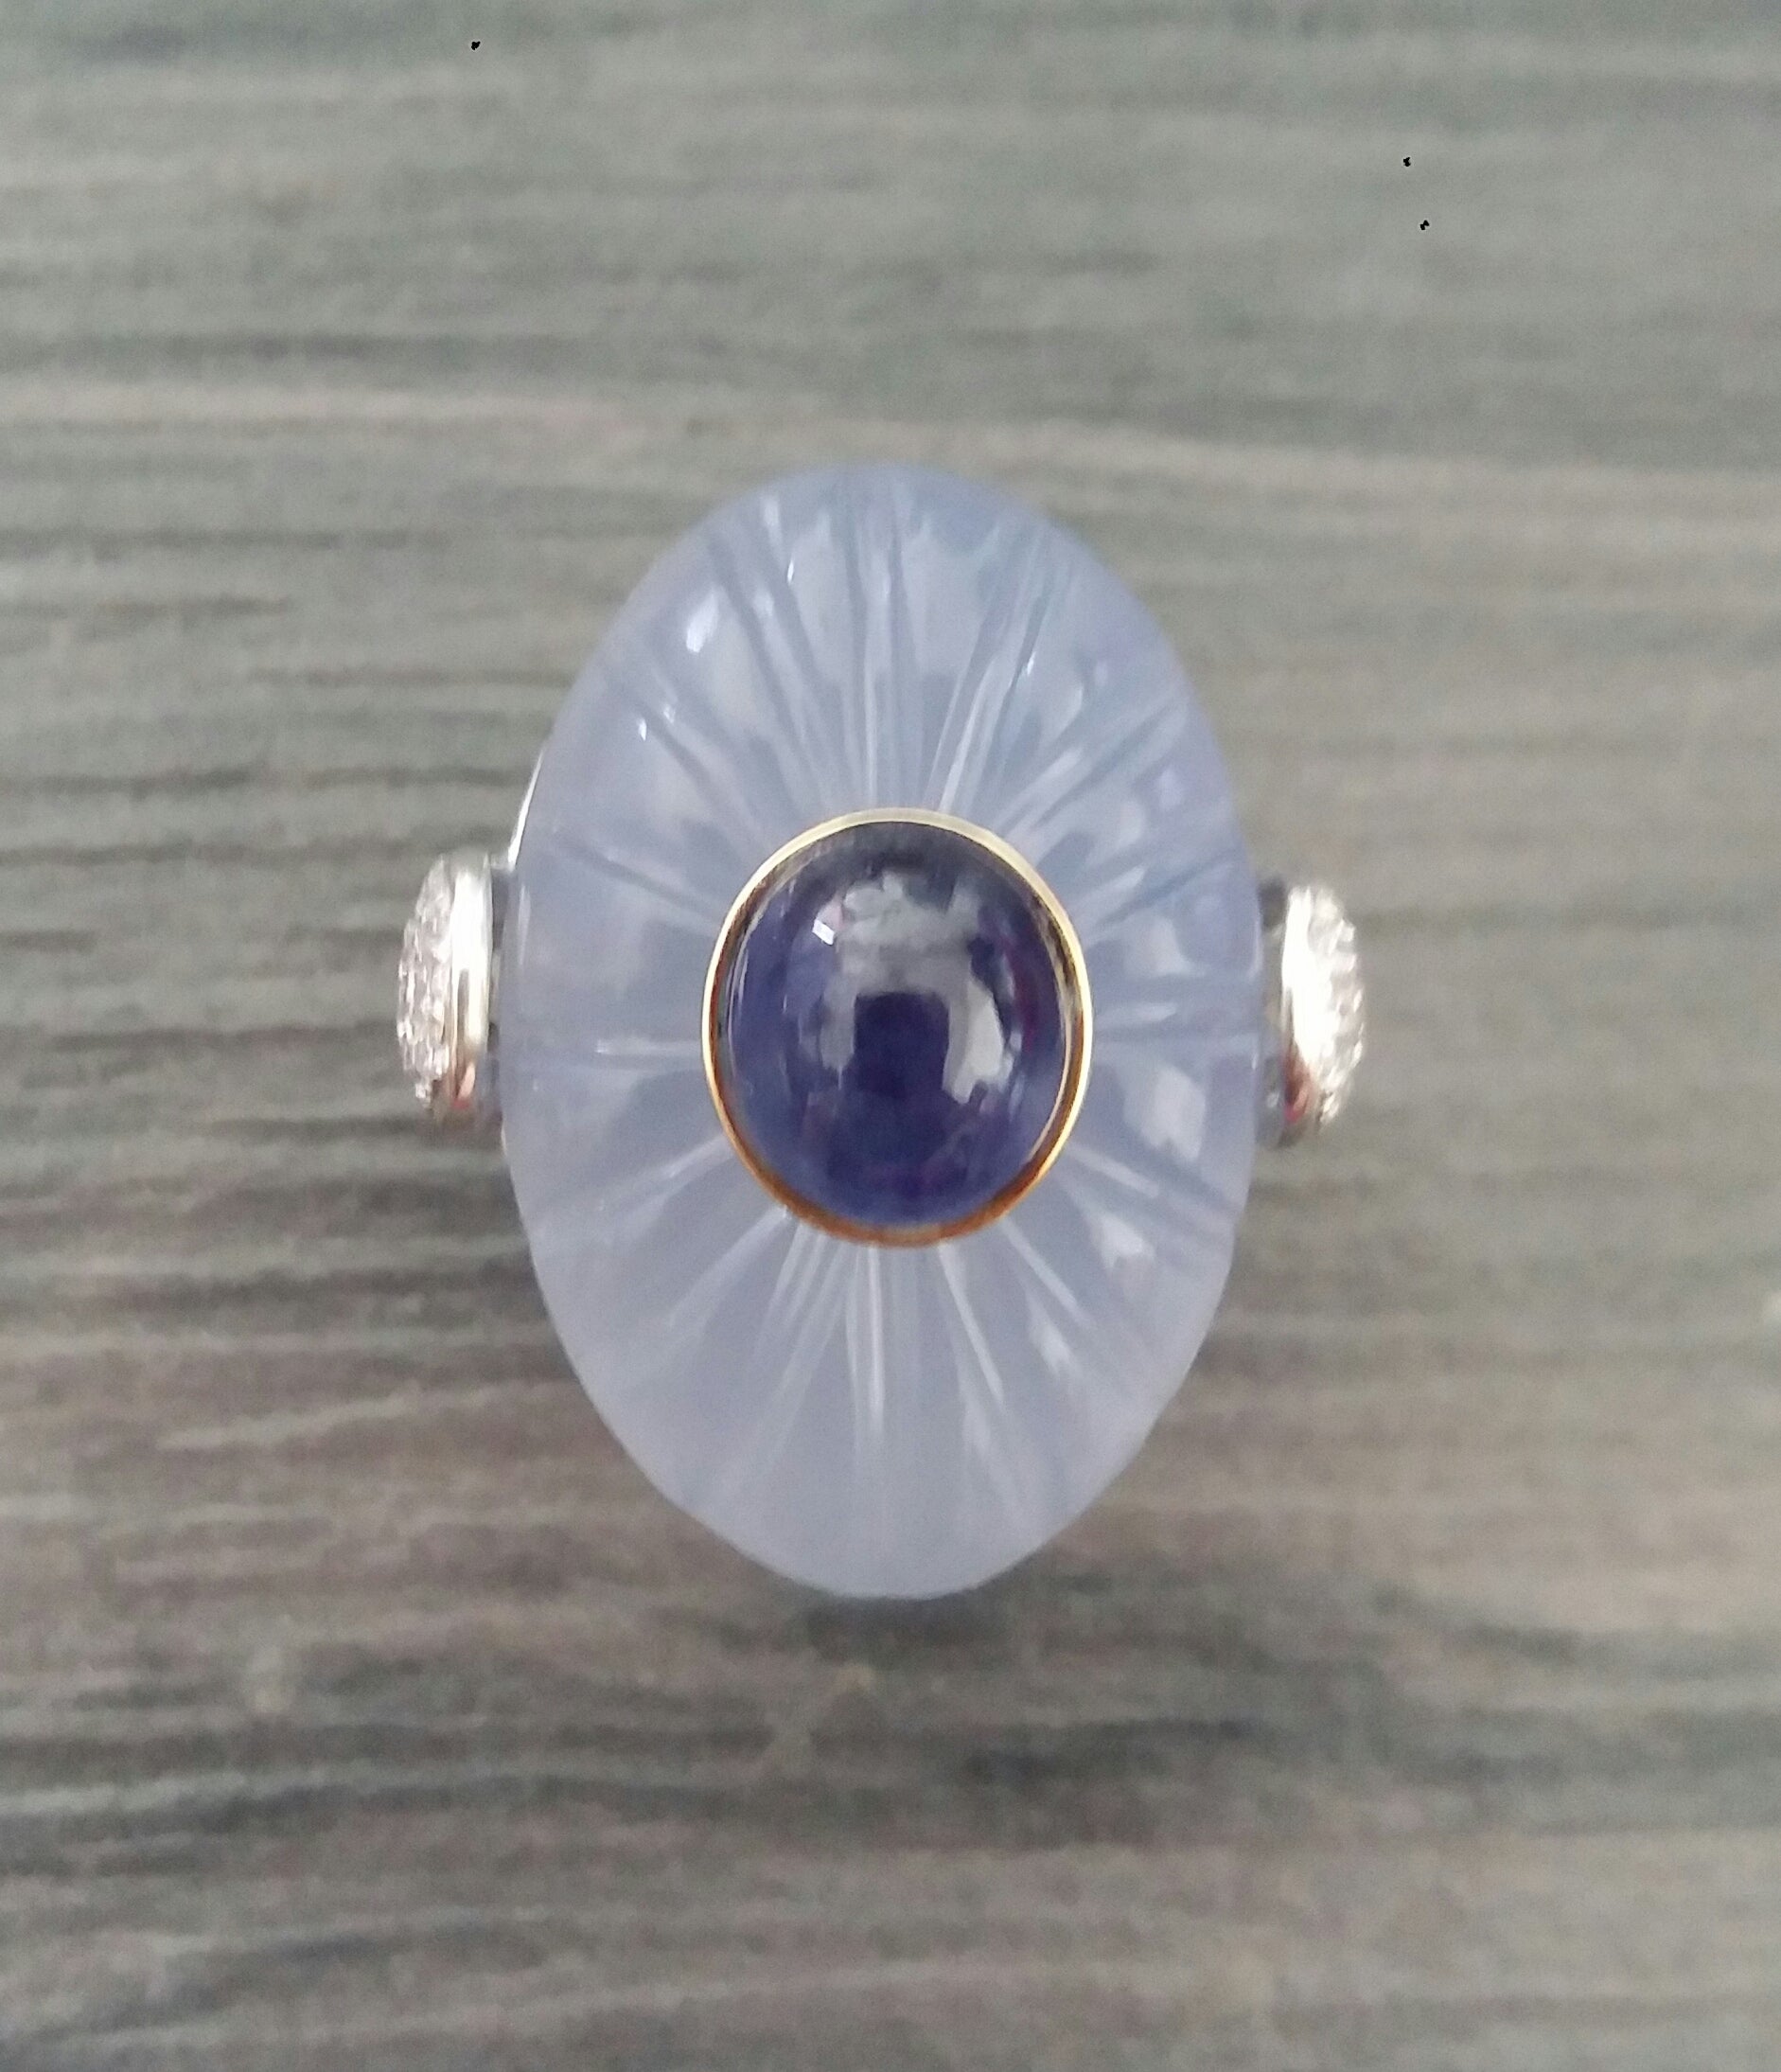 Classic and elegant ring composed of an oval engraved Chalcedony cabochon surmounted by a Blue Sapphire Cabochon set in a 14k yellow gold bezel...The shank  is also in 14k  White Gold with 2 pear shape pave' of 34 full cut diamonds on the sides